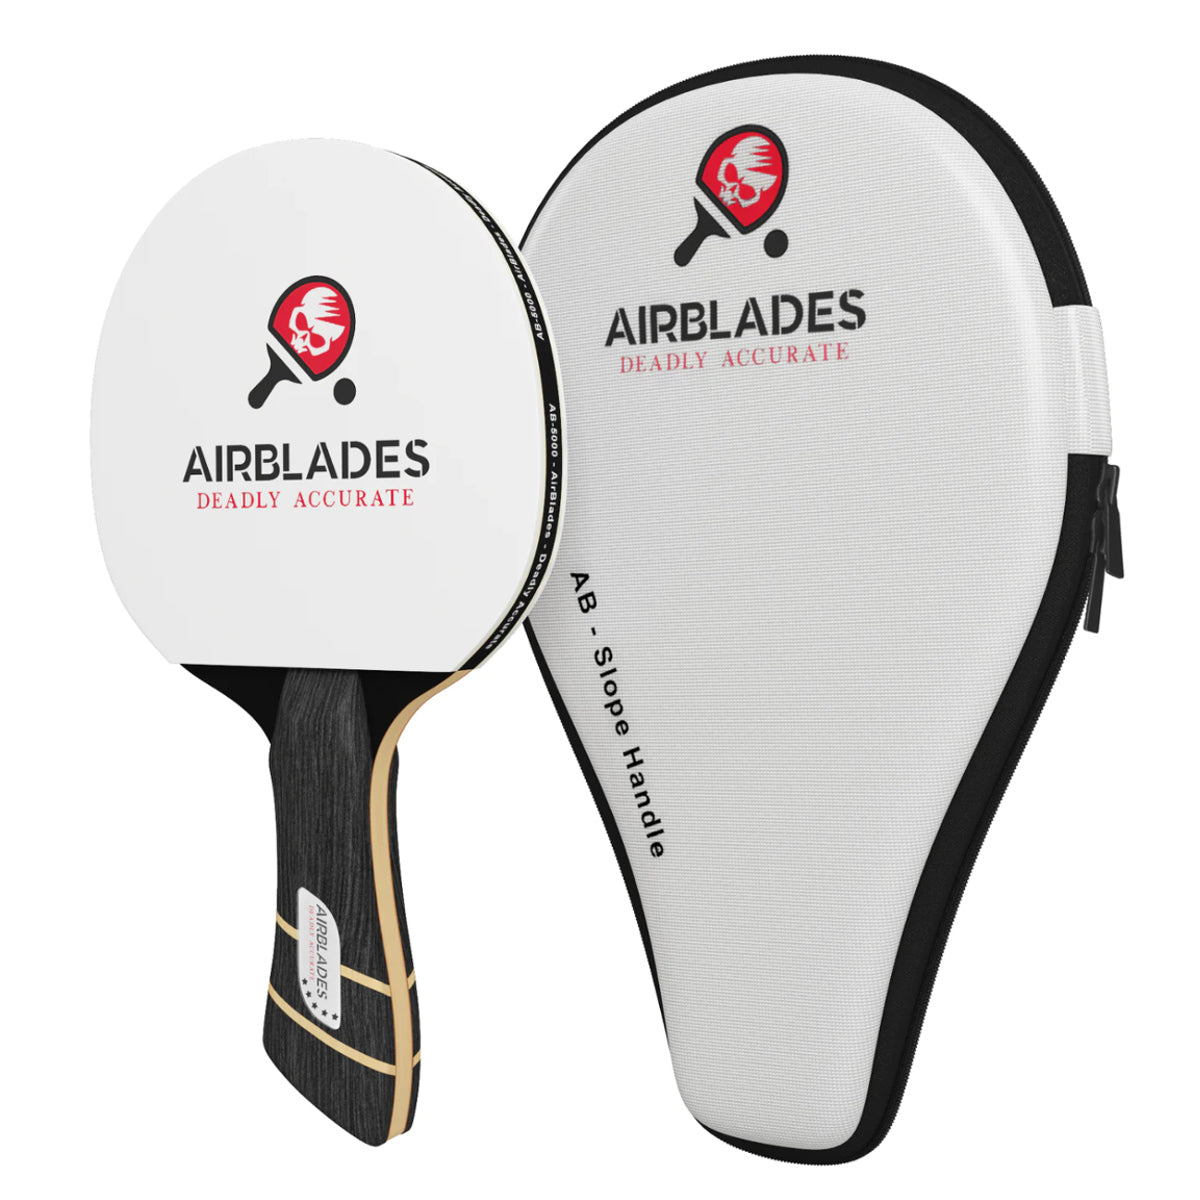 Airblades Professional Ping Pong Paddle with Hard Carry Case (5 Star)